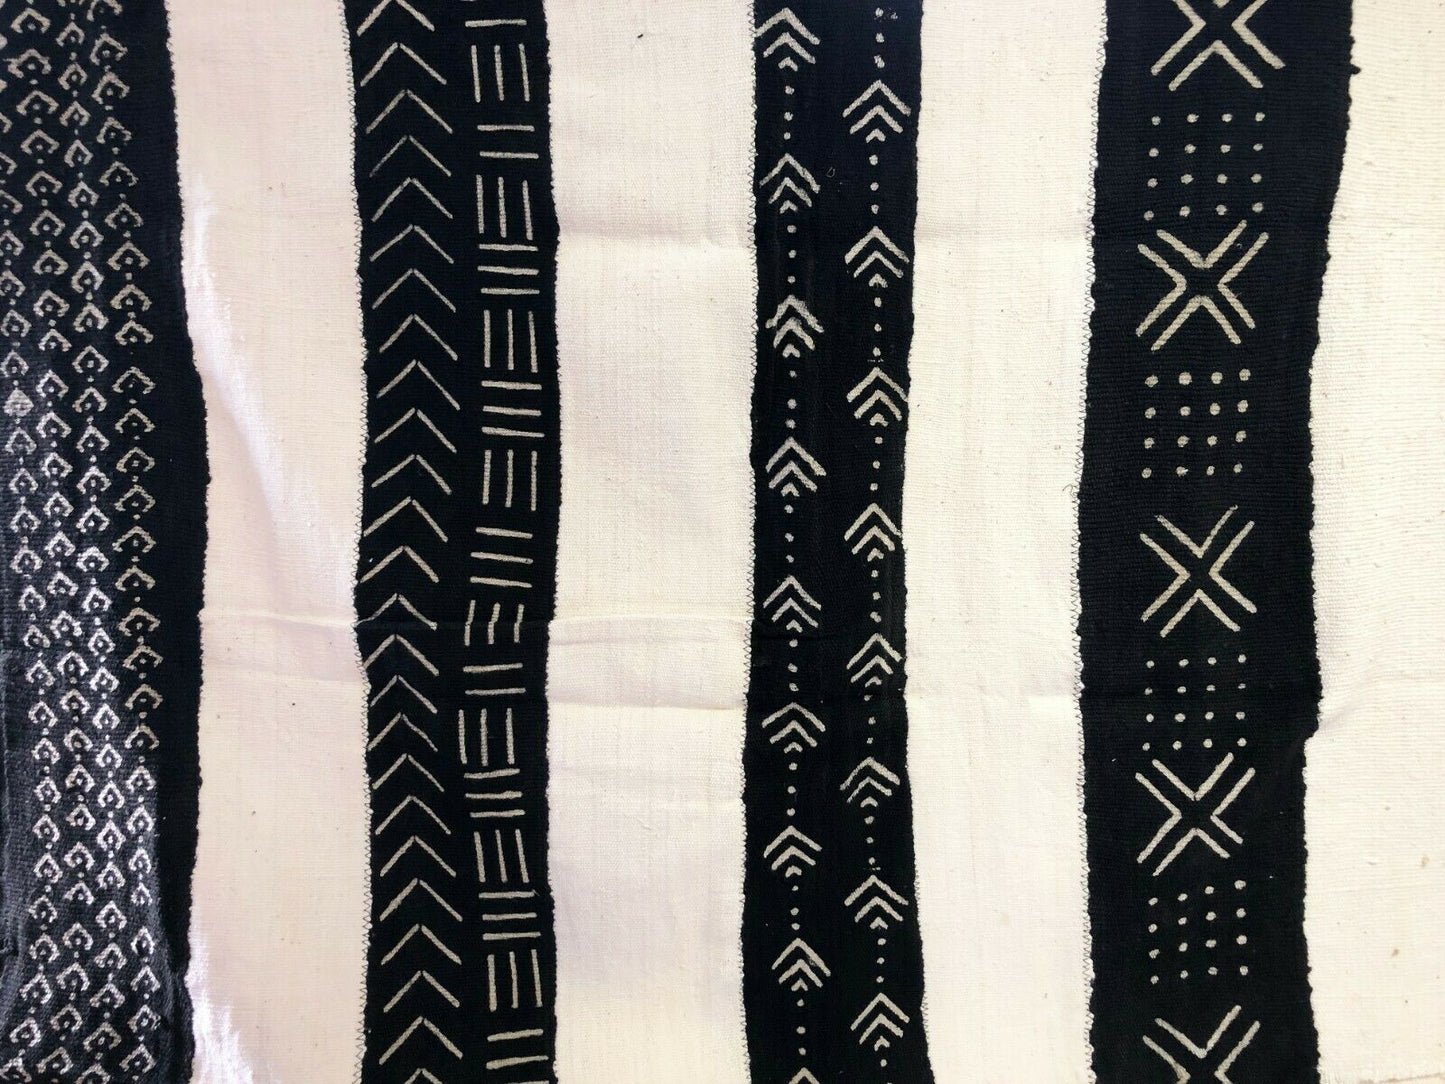 African  Black and White Mud Cloth Textile Mali 40" by 60" #294